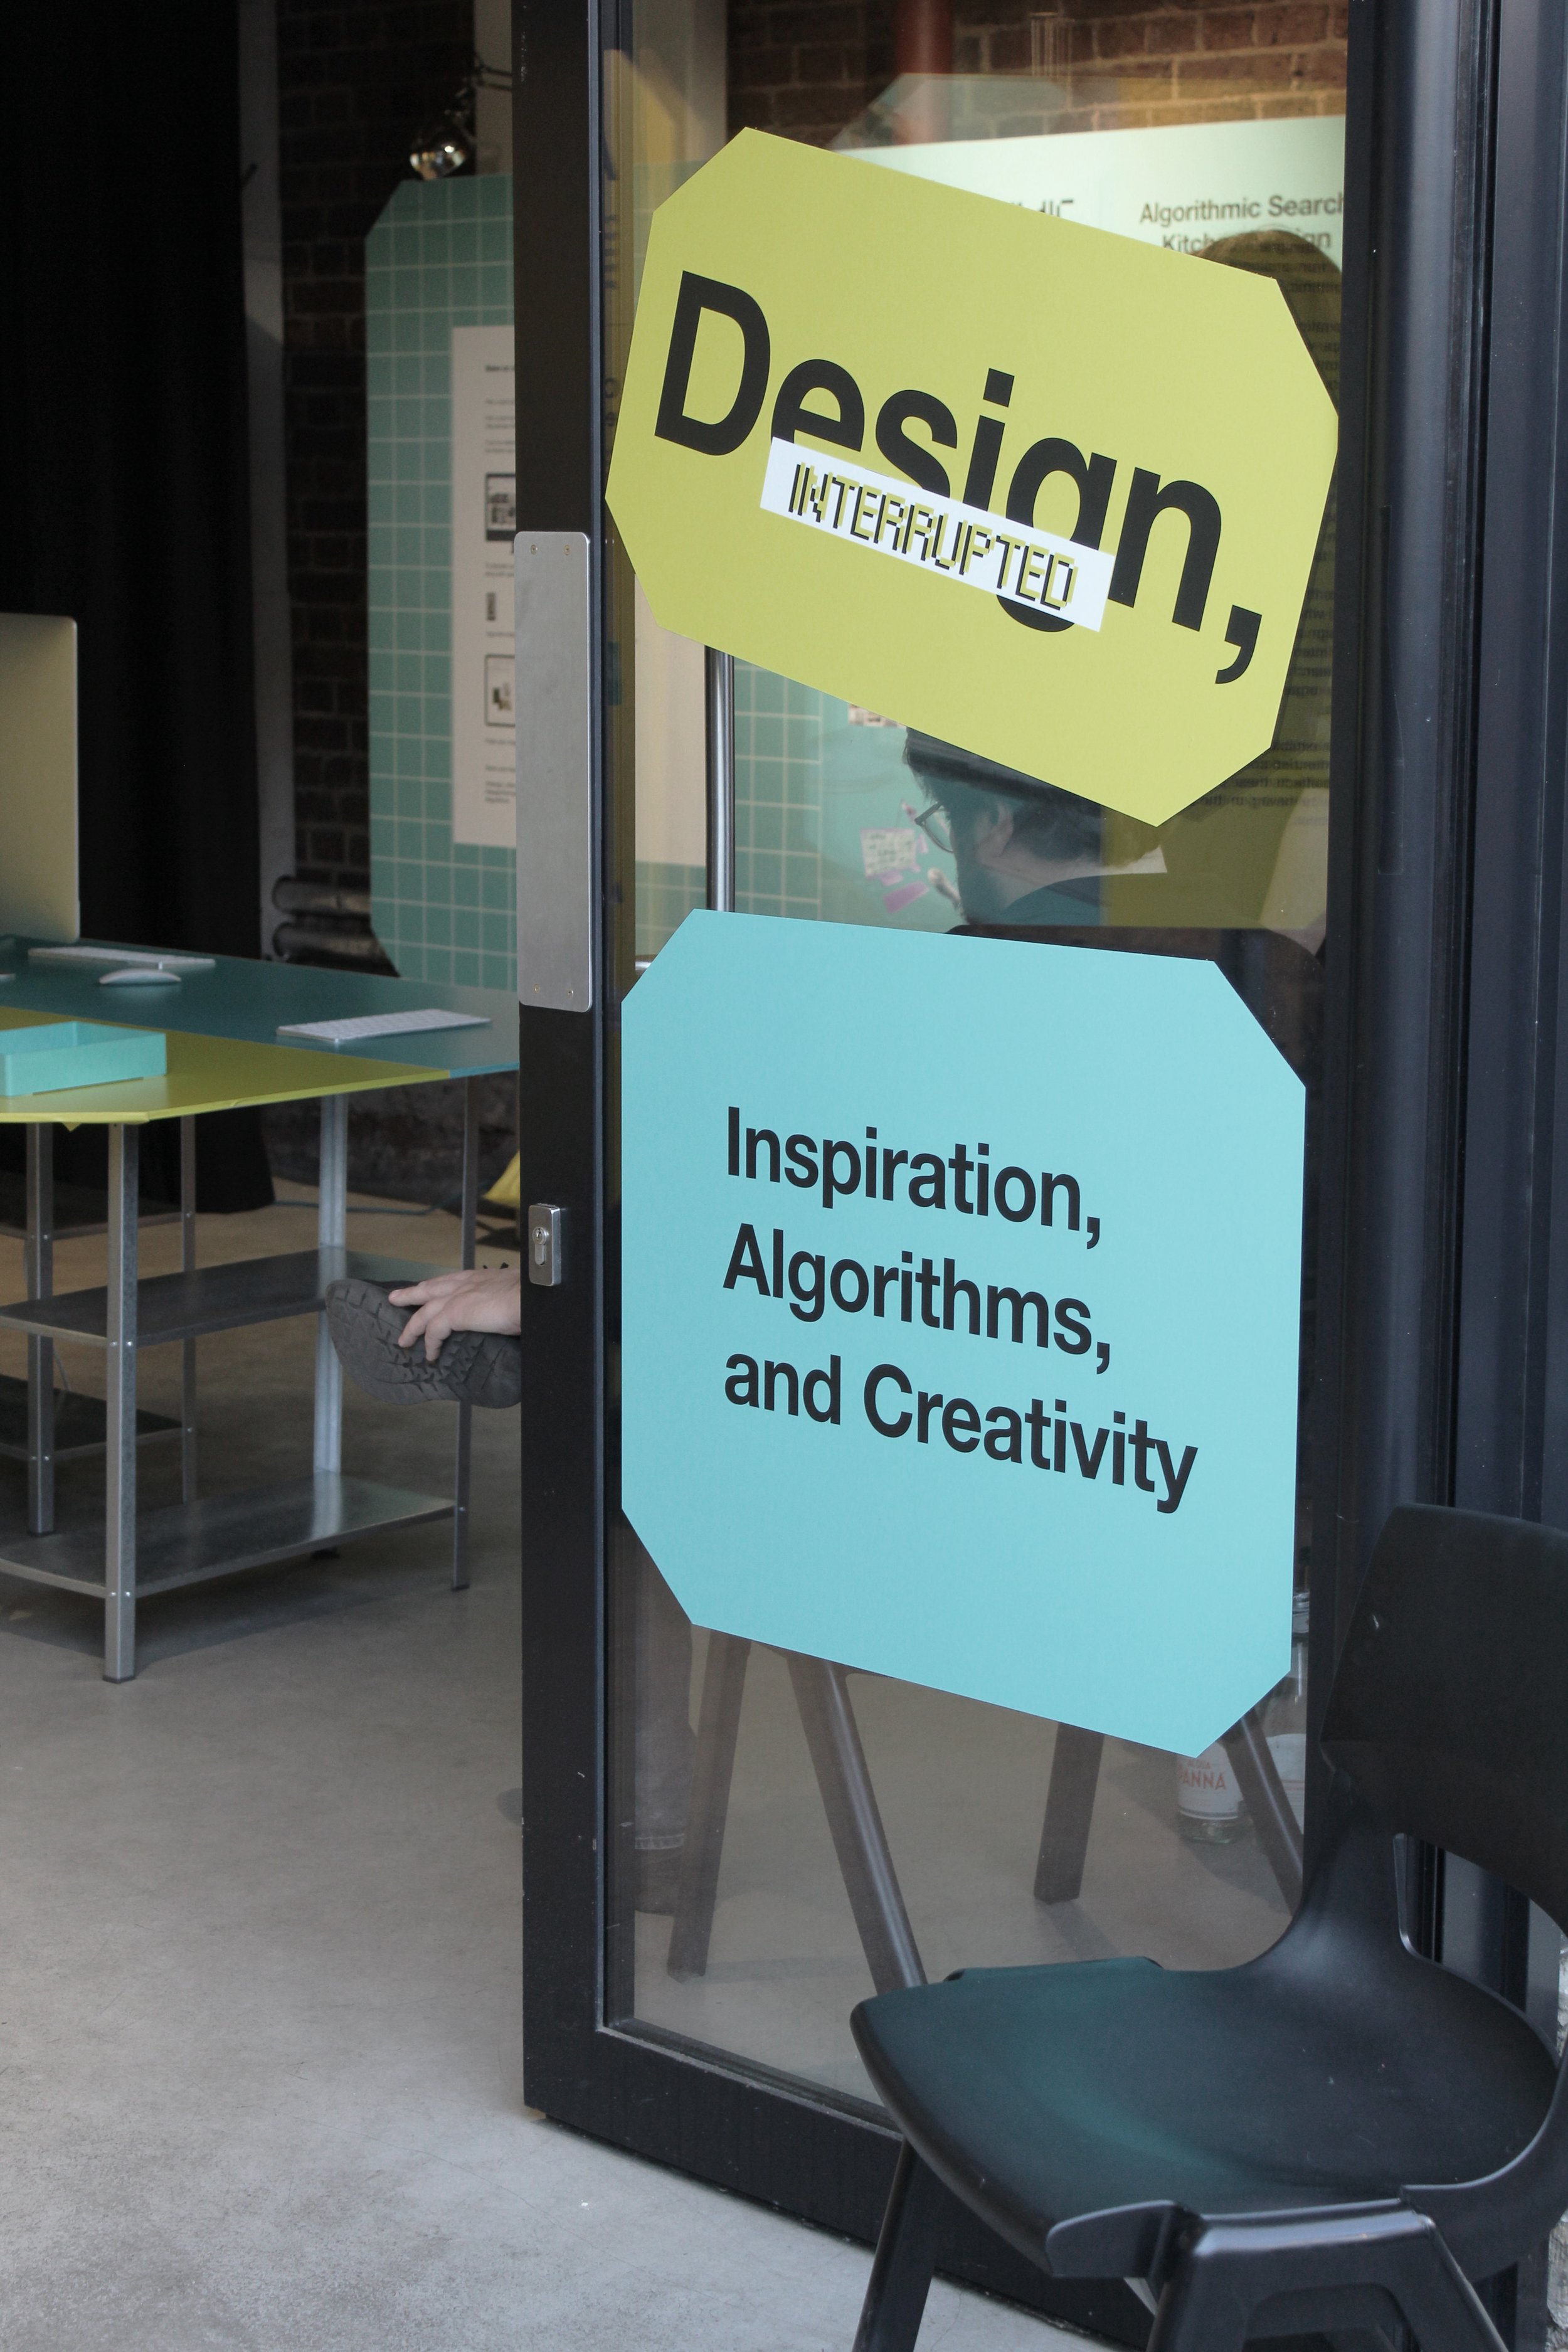 Design, Interrupted at King's Cross by Maggie Mustaklem